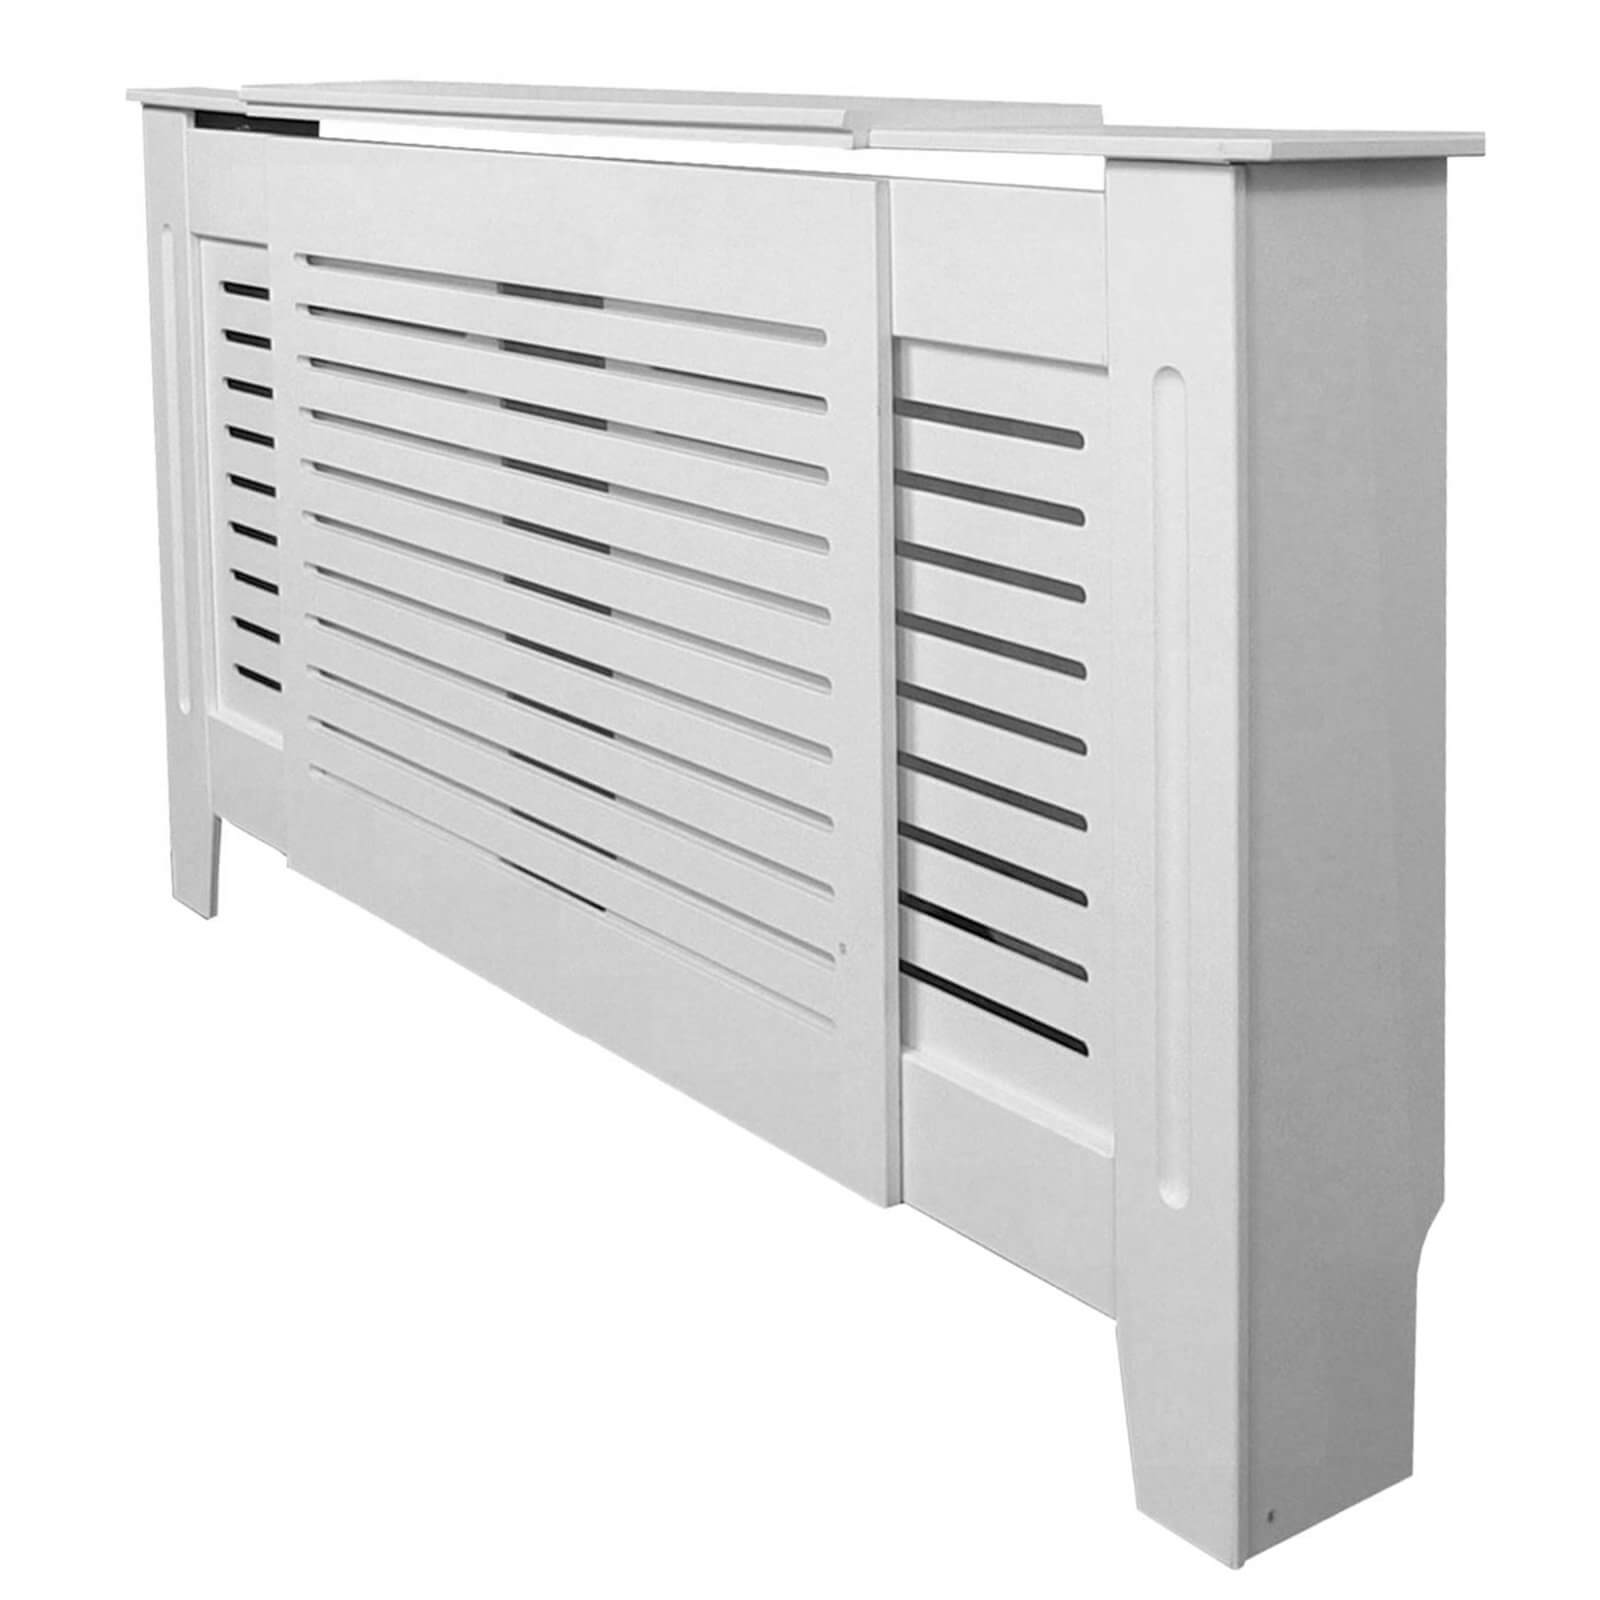 Radiator Cover with Horizontal Slatted Design in White - Adjustable